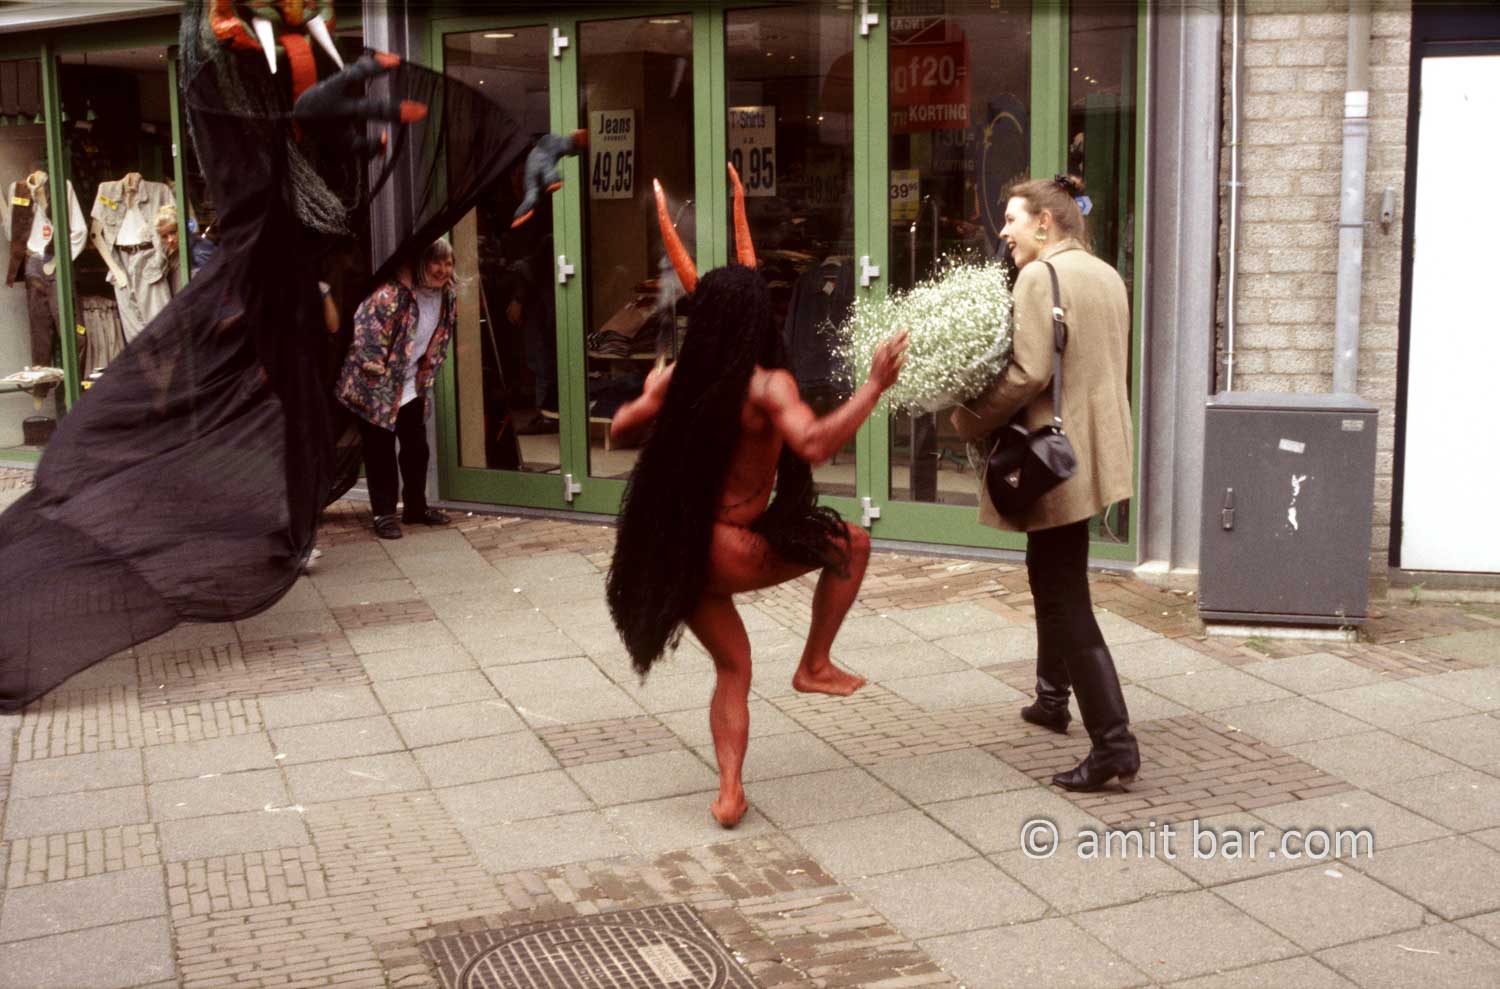 Who's afraid of the Devil II: An actor dressed as a devil is chasing a girl on street theater festival in Doetinchem, The Netherlands